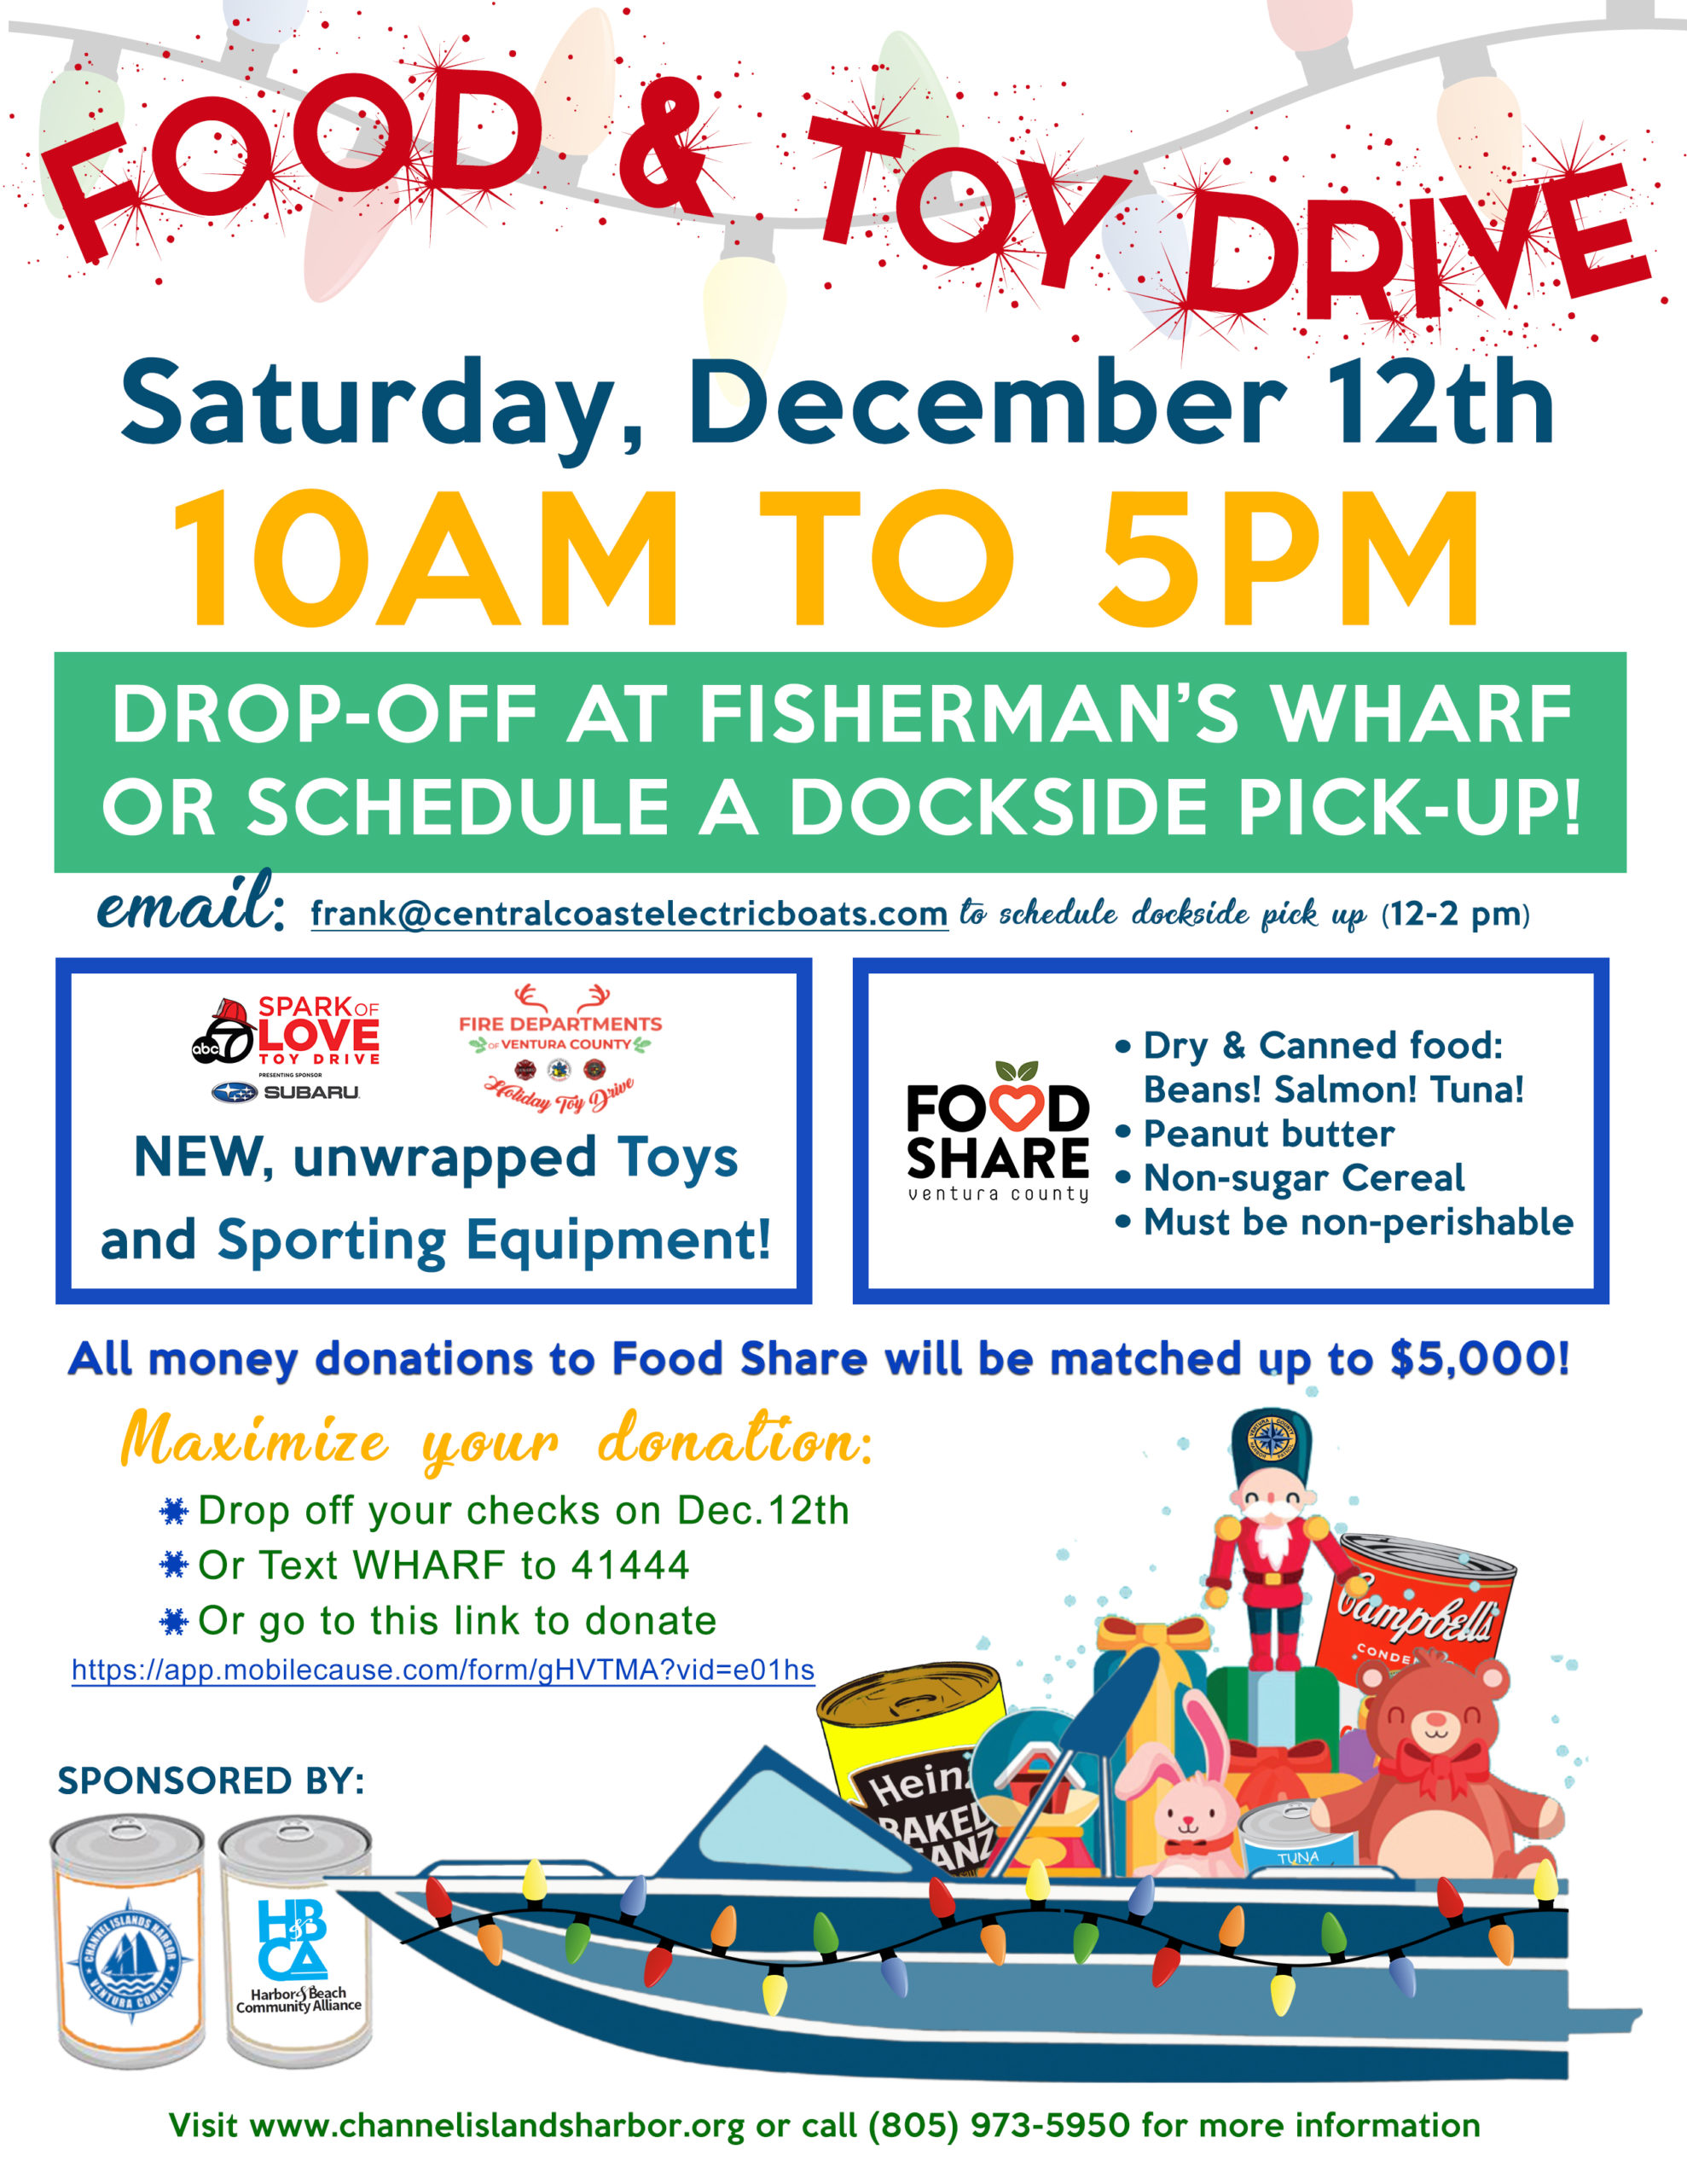 Food and Toy Drive flyer; Saturday, December 12th 10 AM - 5 PM